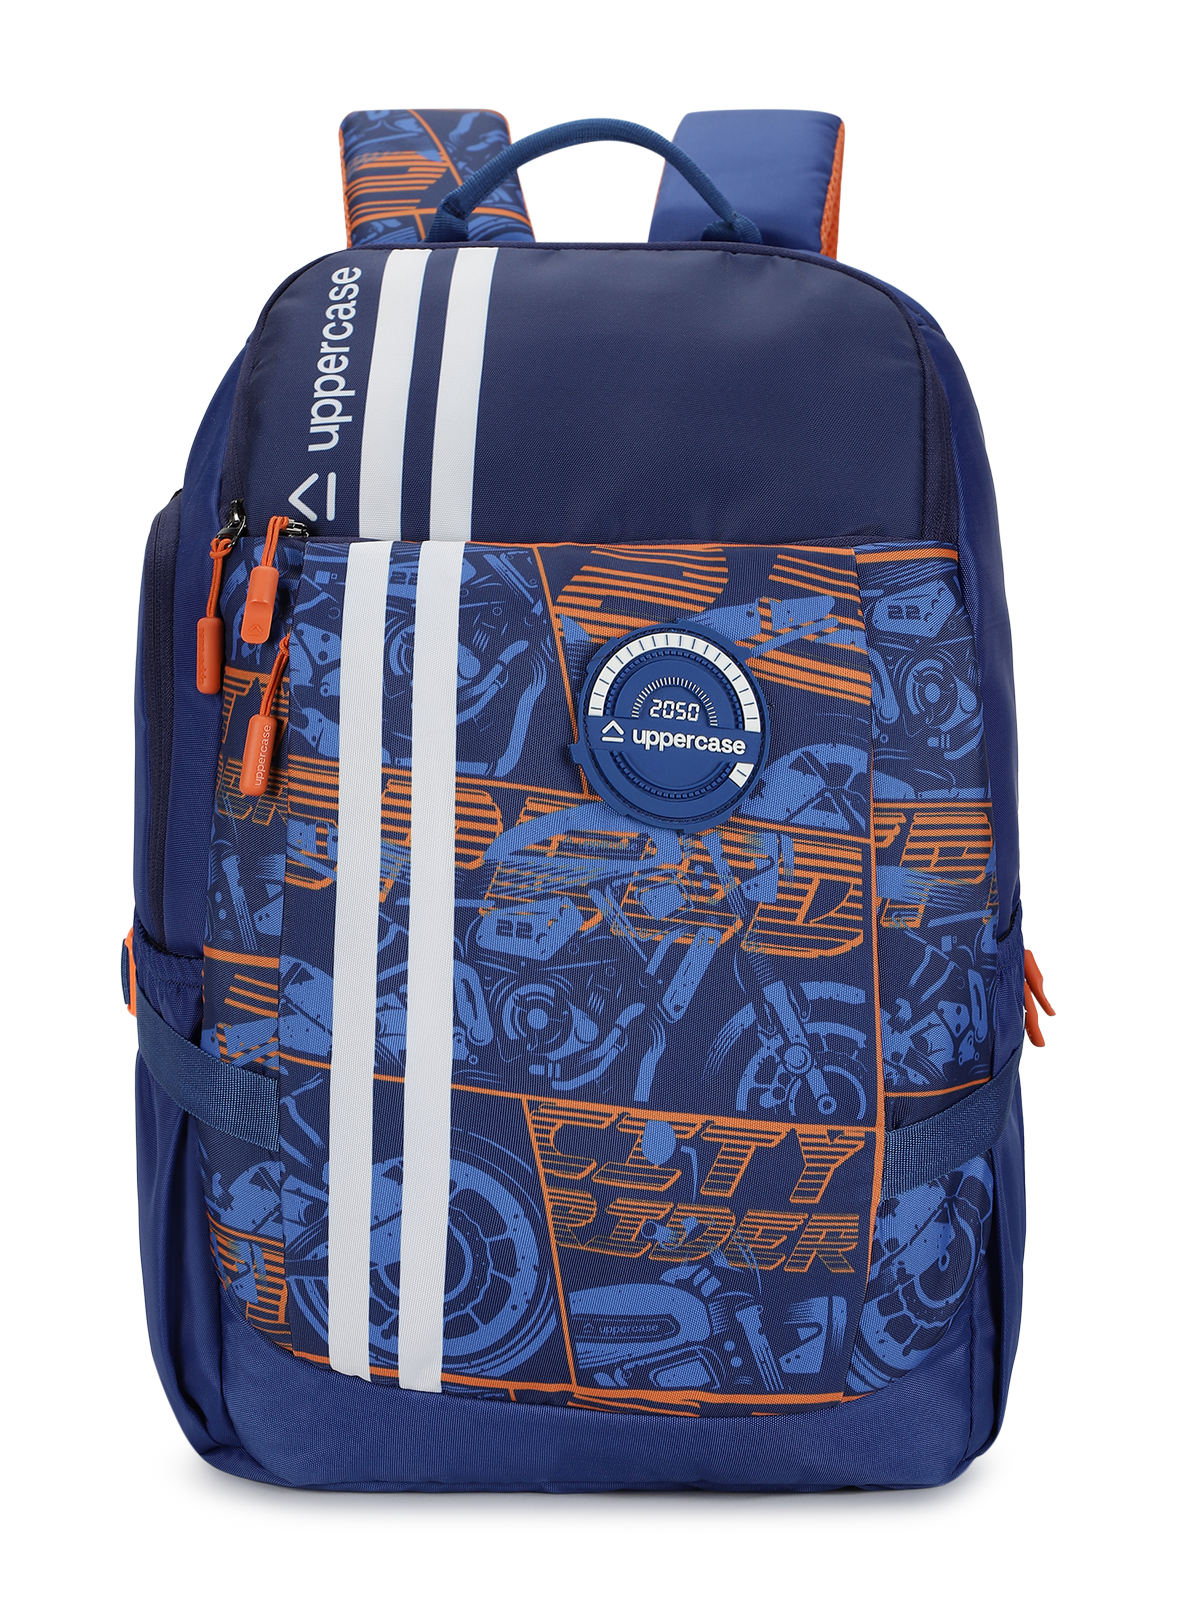 uppercase Campus 01 Laptop Backpack Double Compartment School Bag 33L Blue